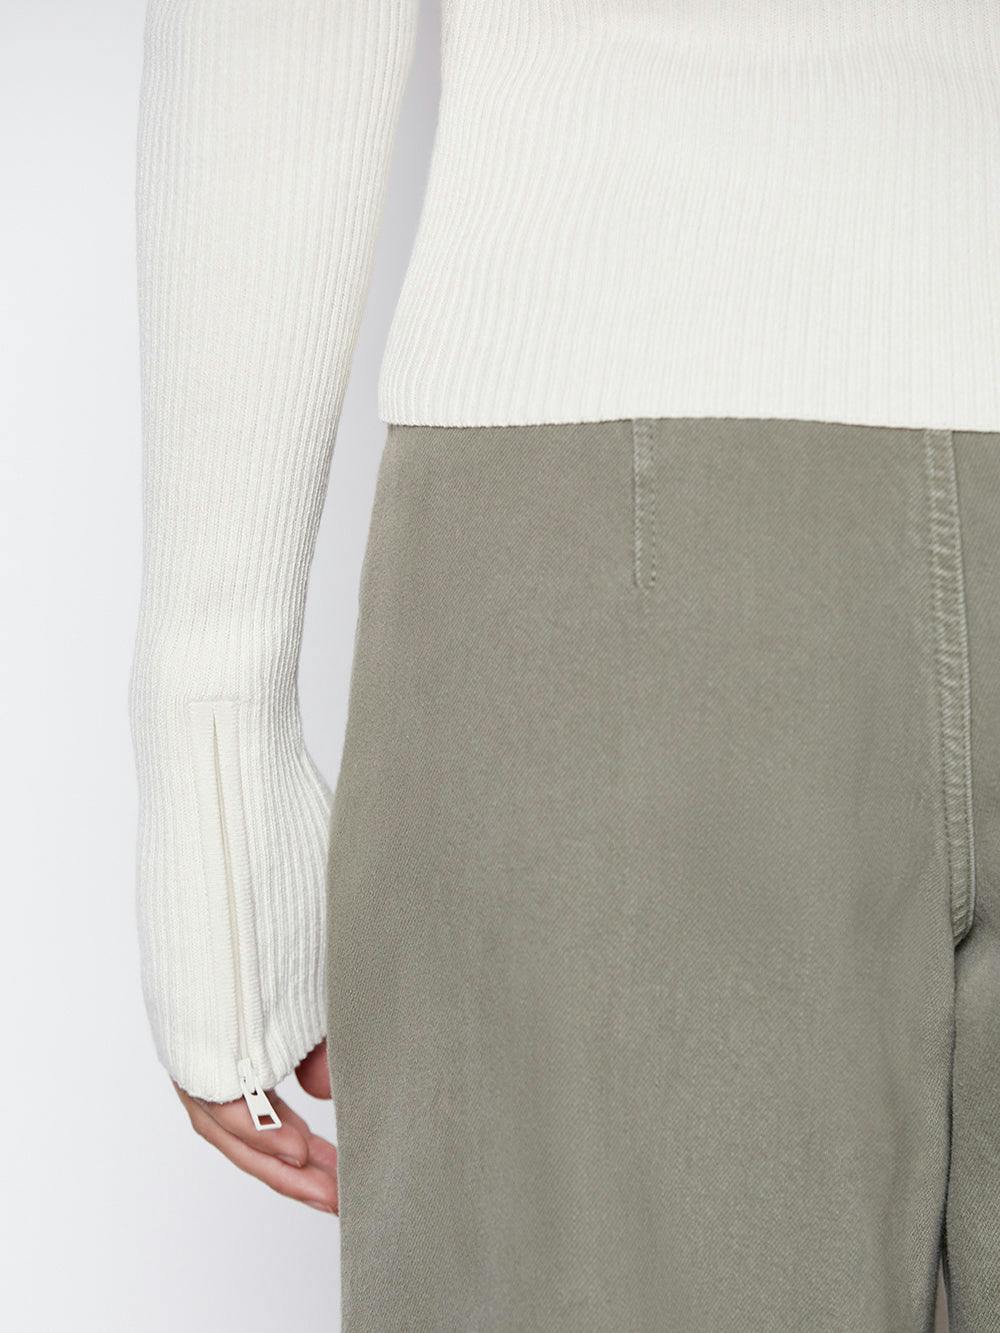 sweater detail view